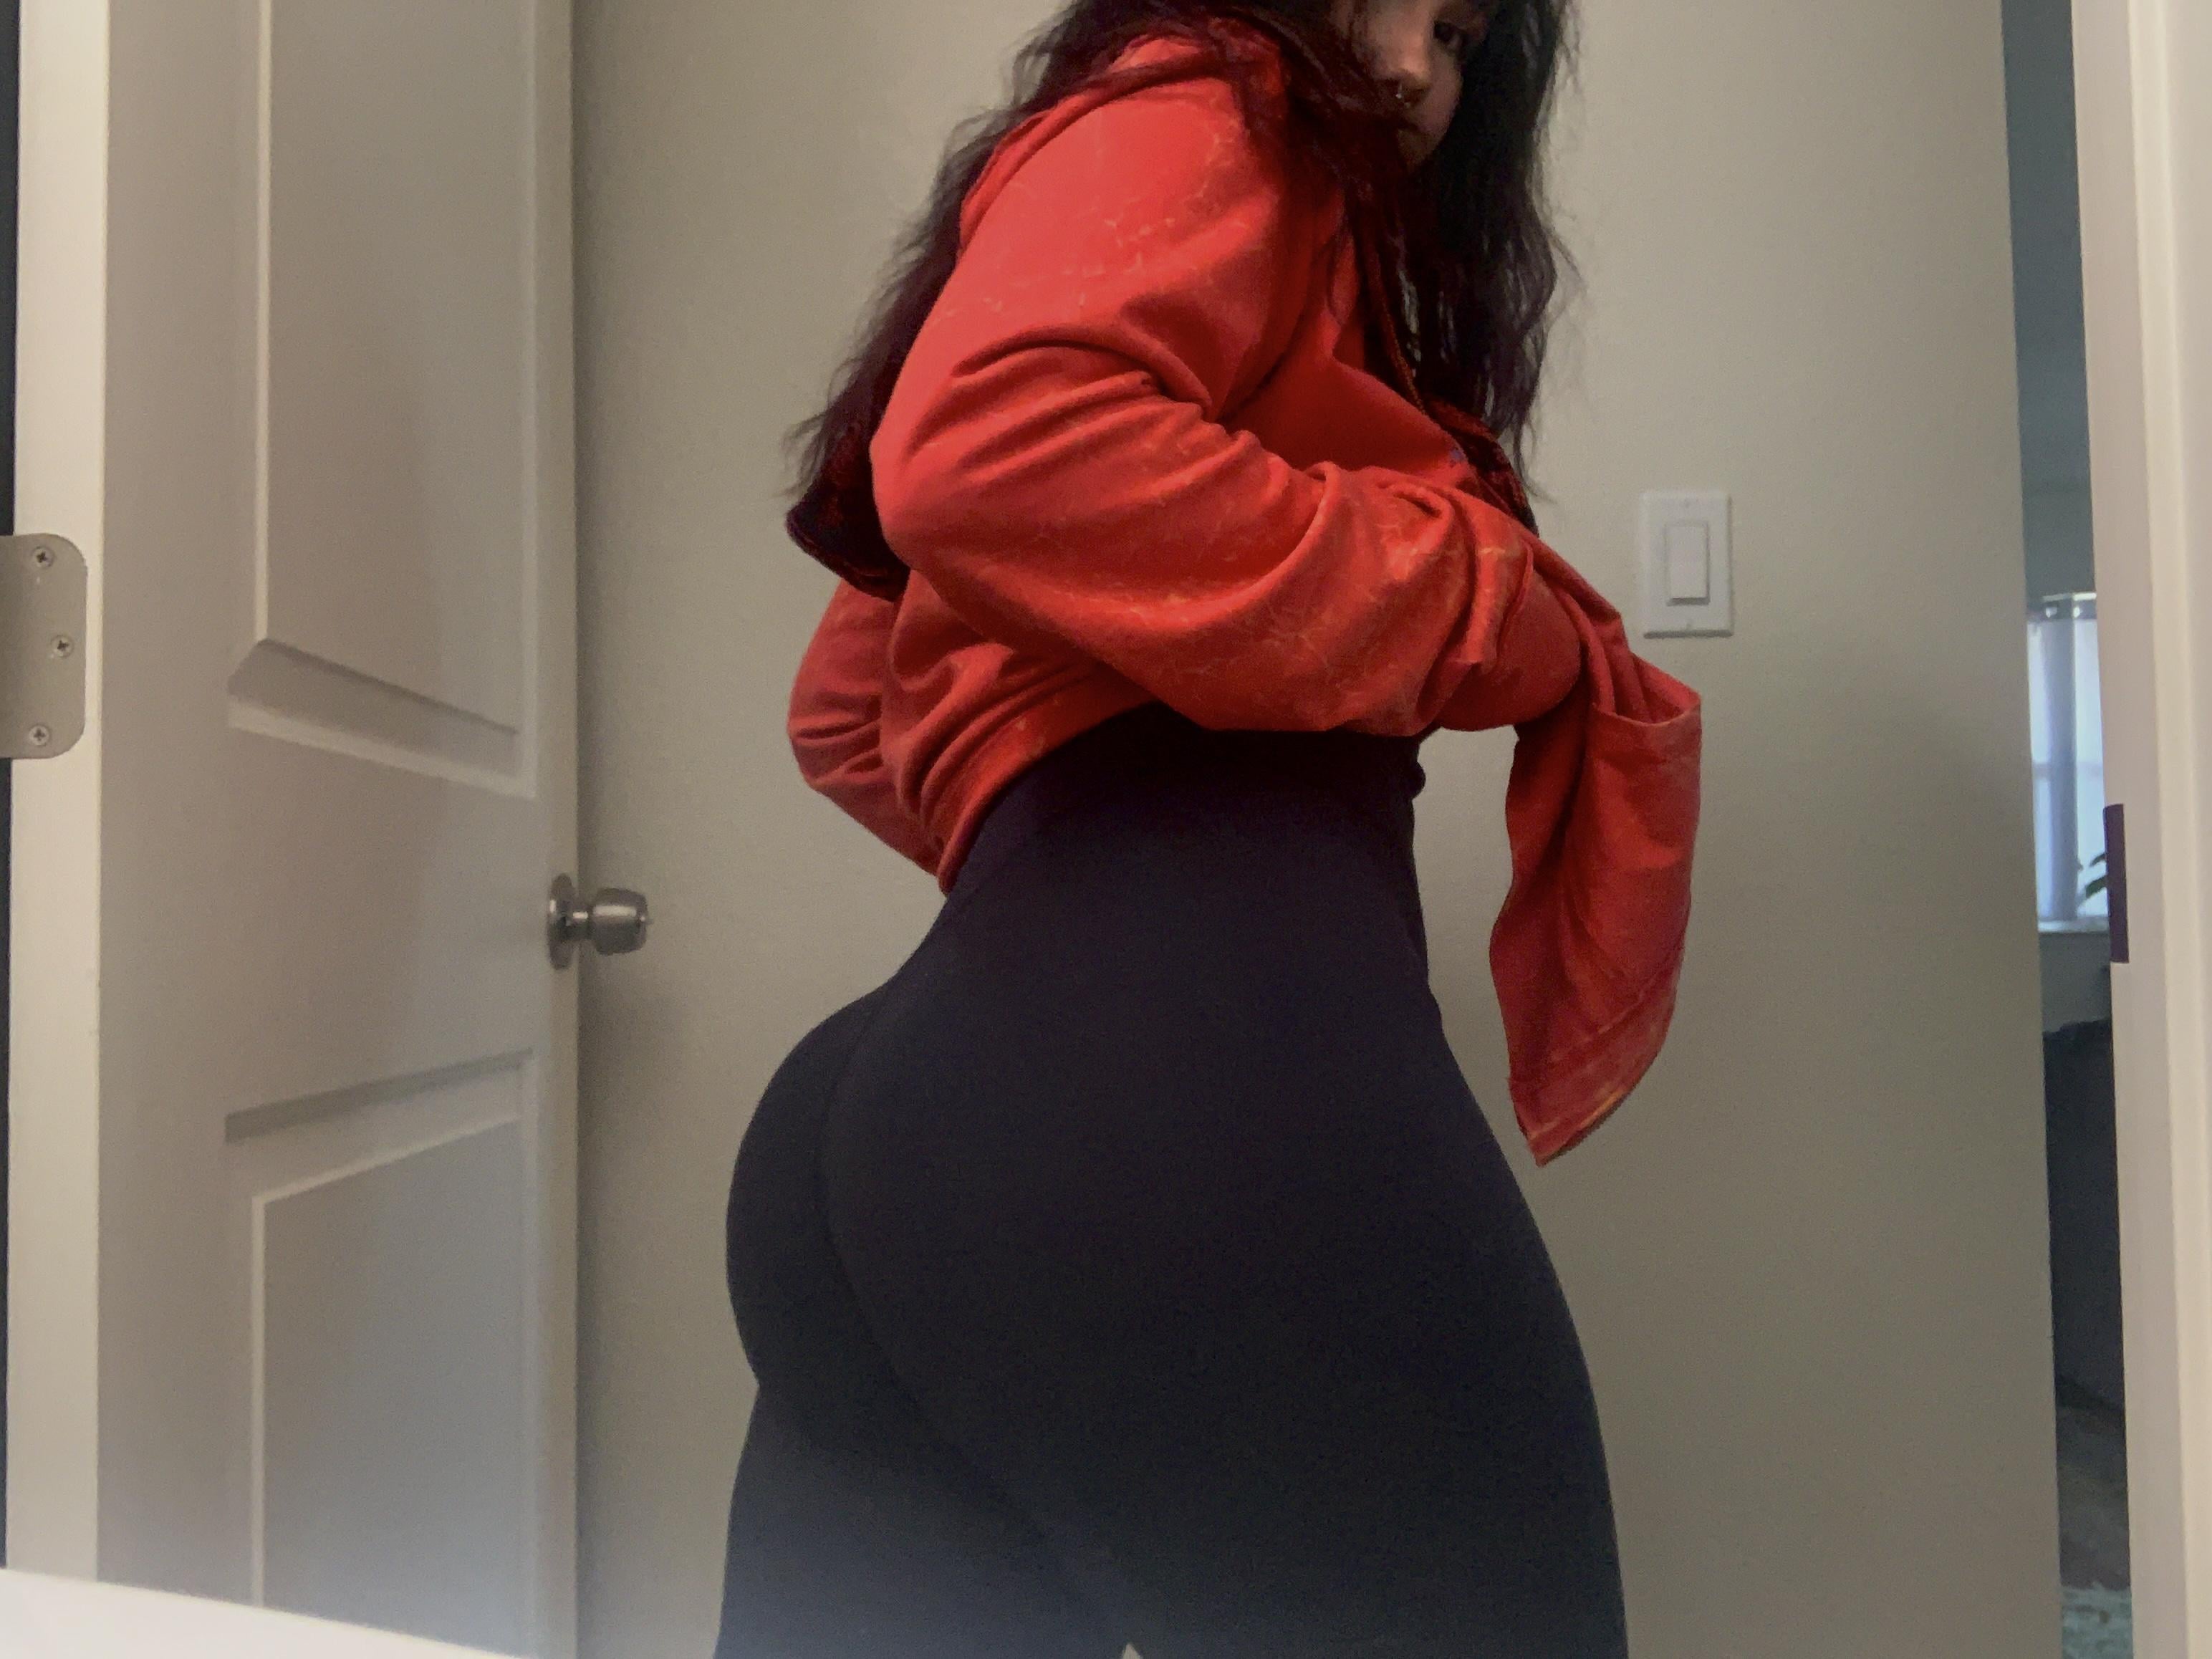 PAWG what do you think of my yoga booty